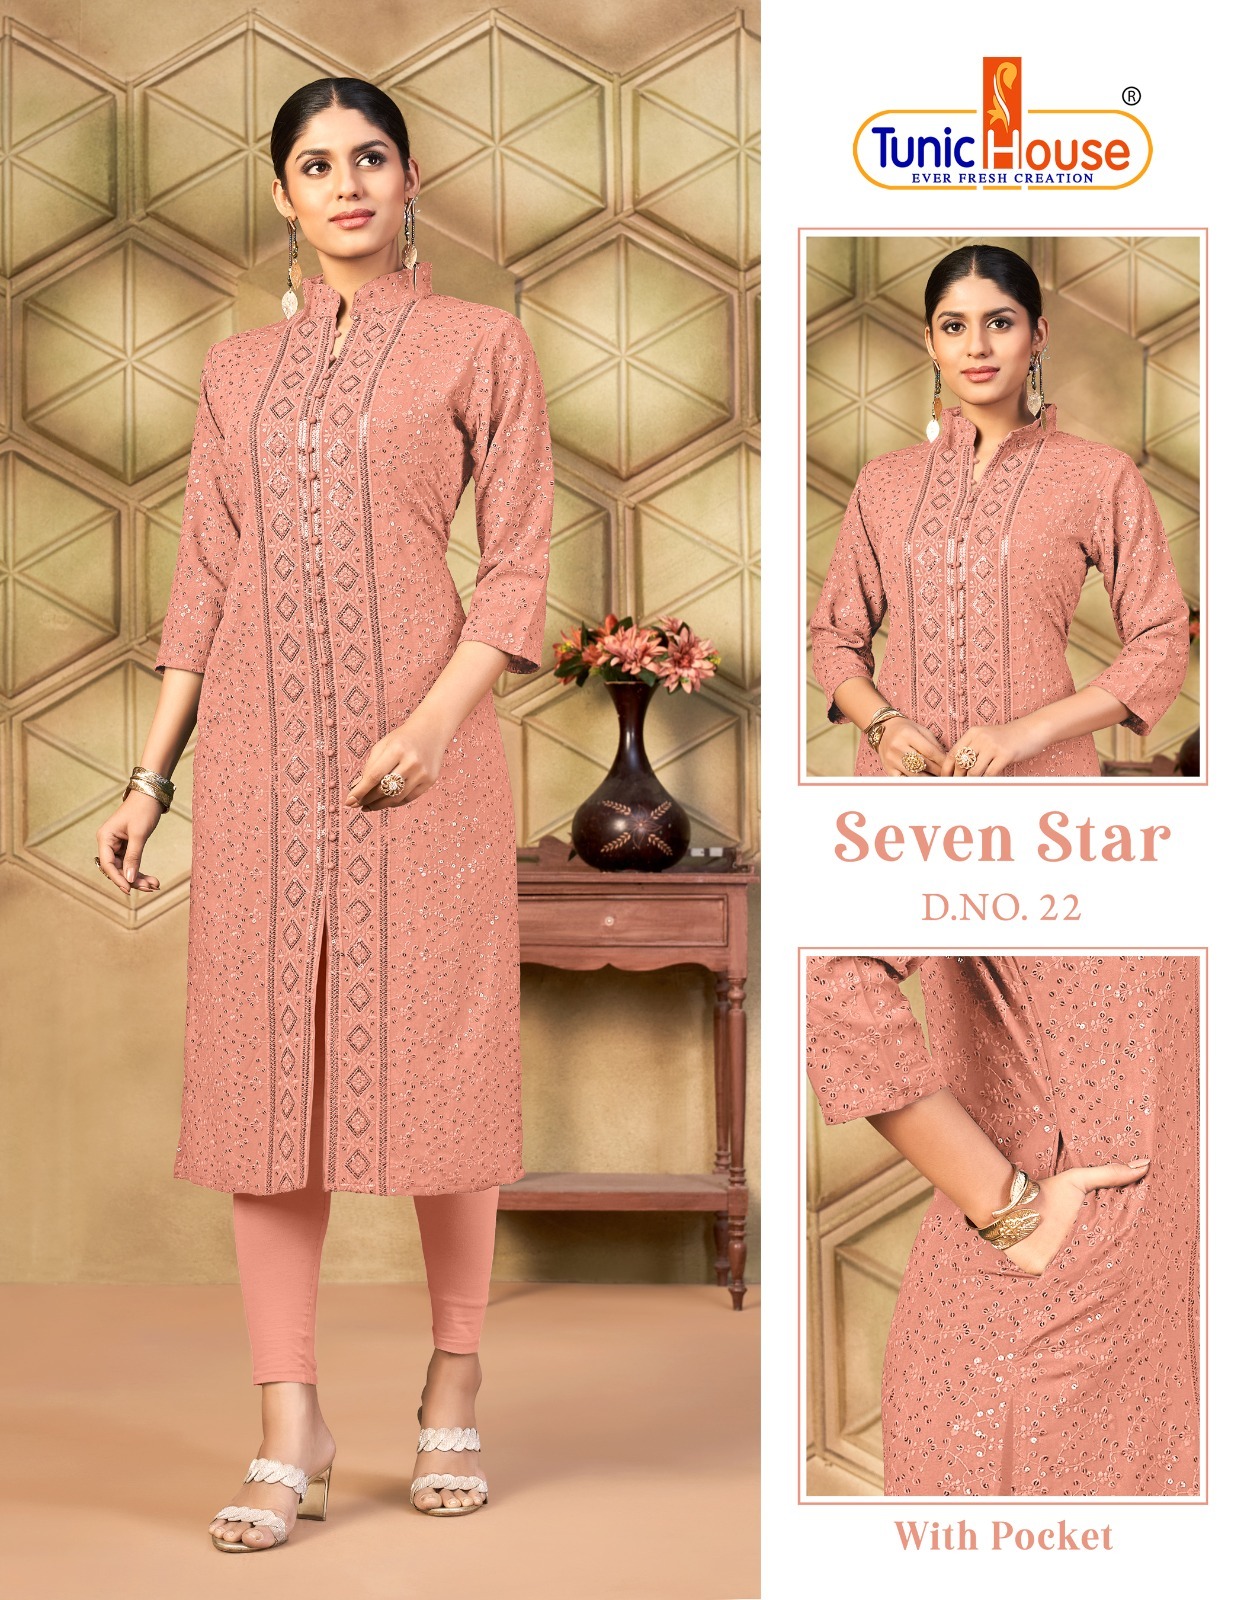 Tunic Houes 7 Star collection 1